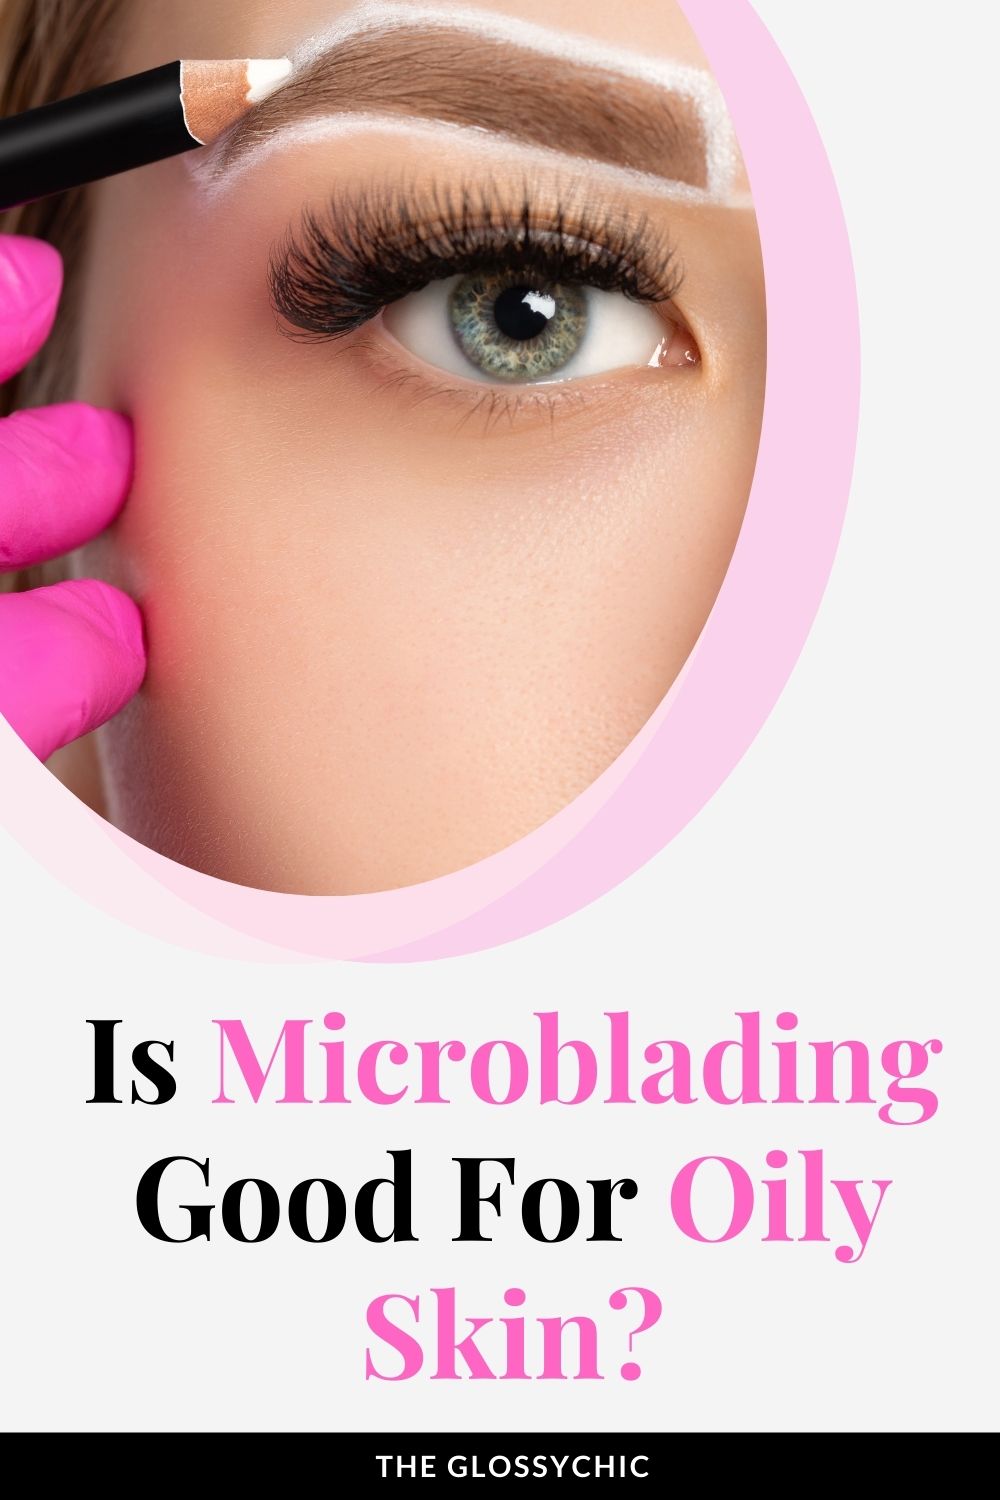 Is Microblading Good For Oily Skin?